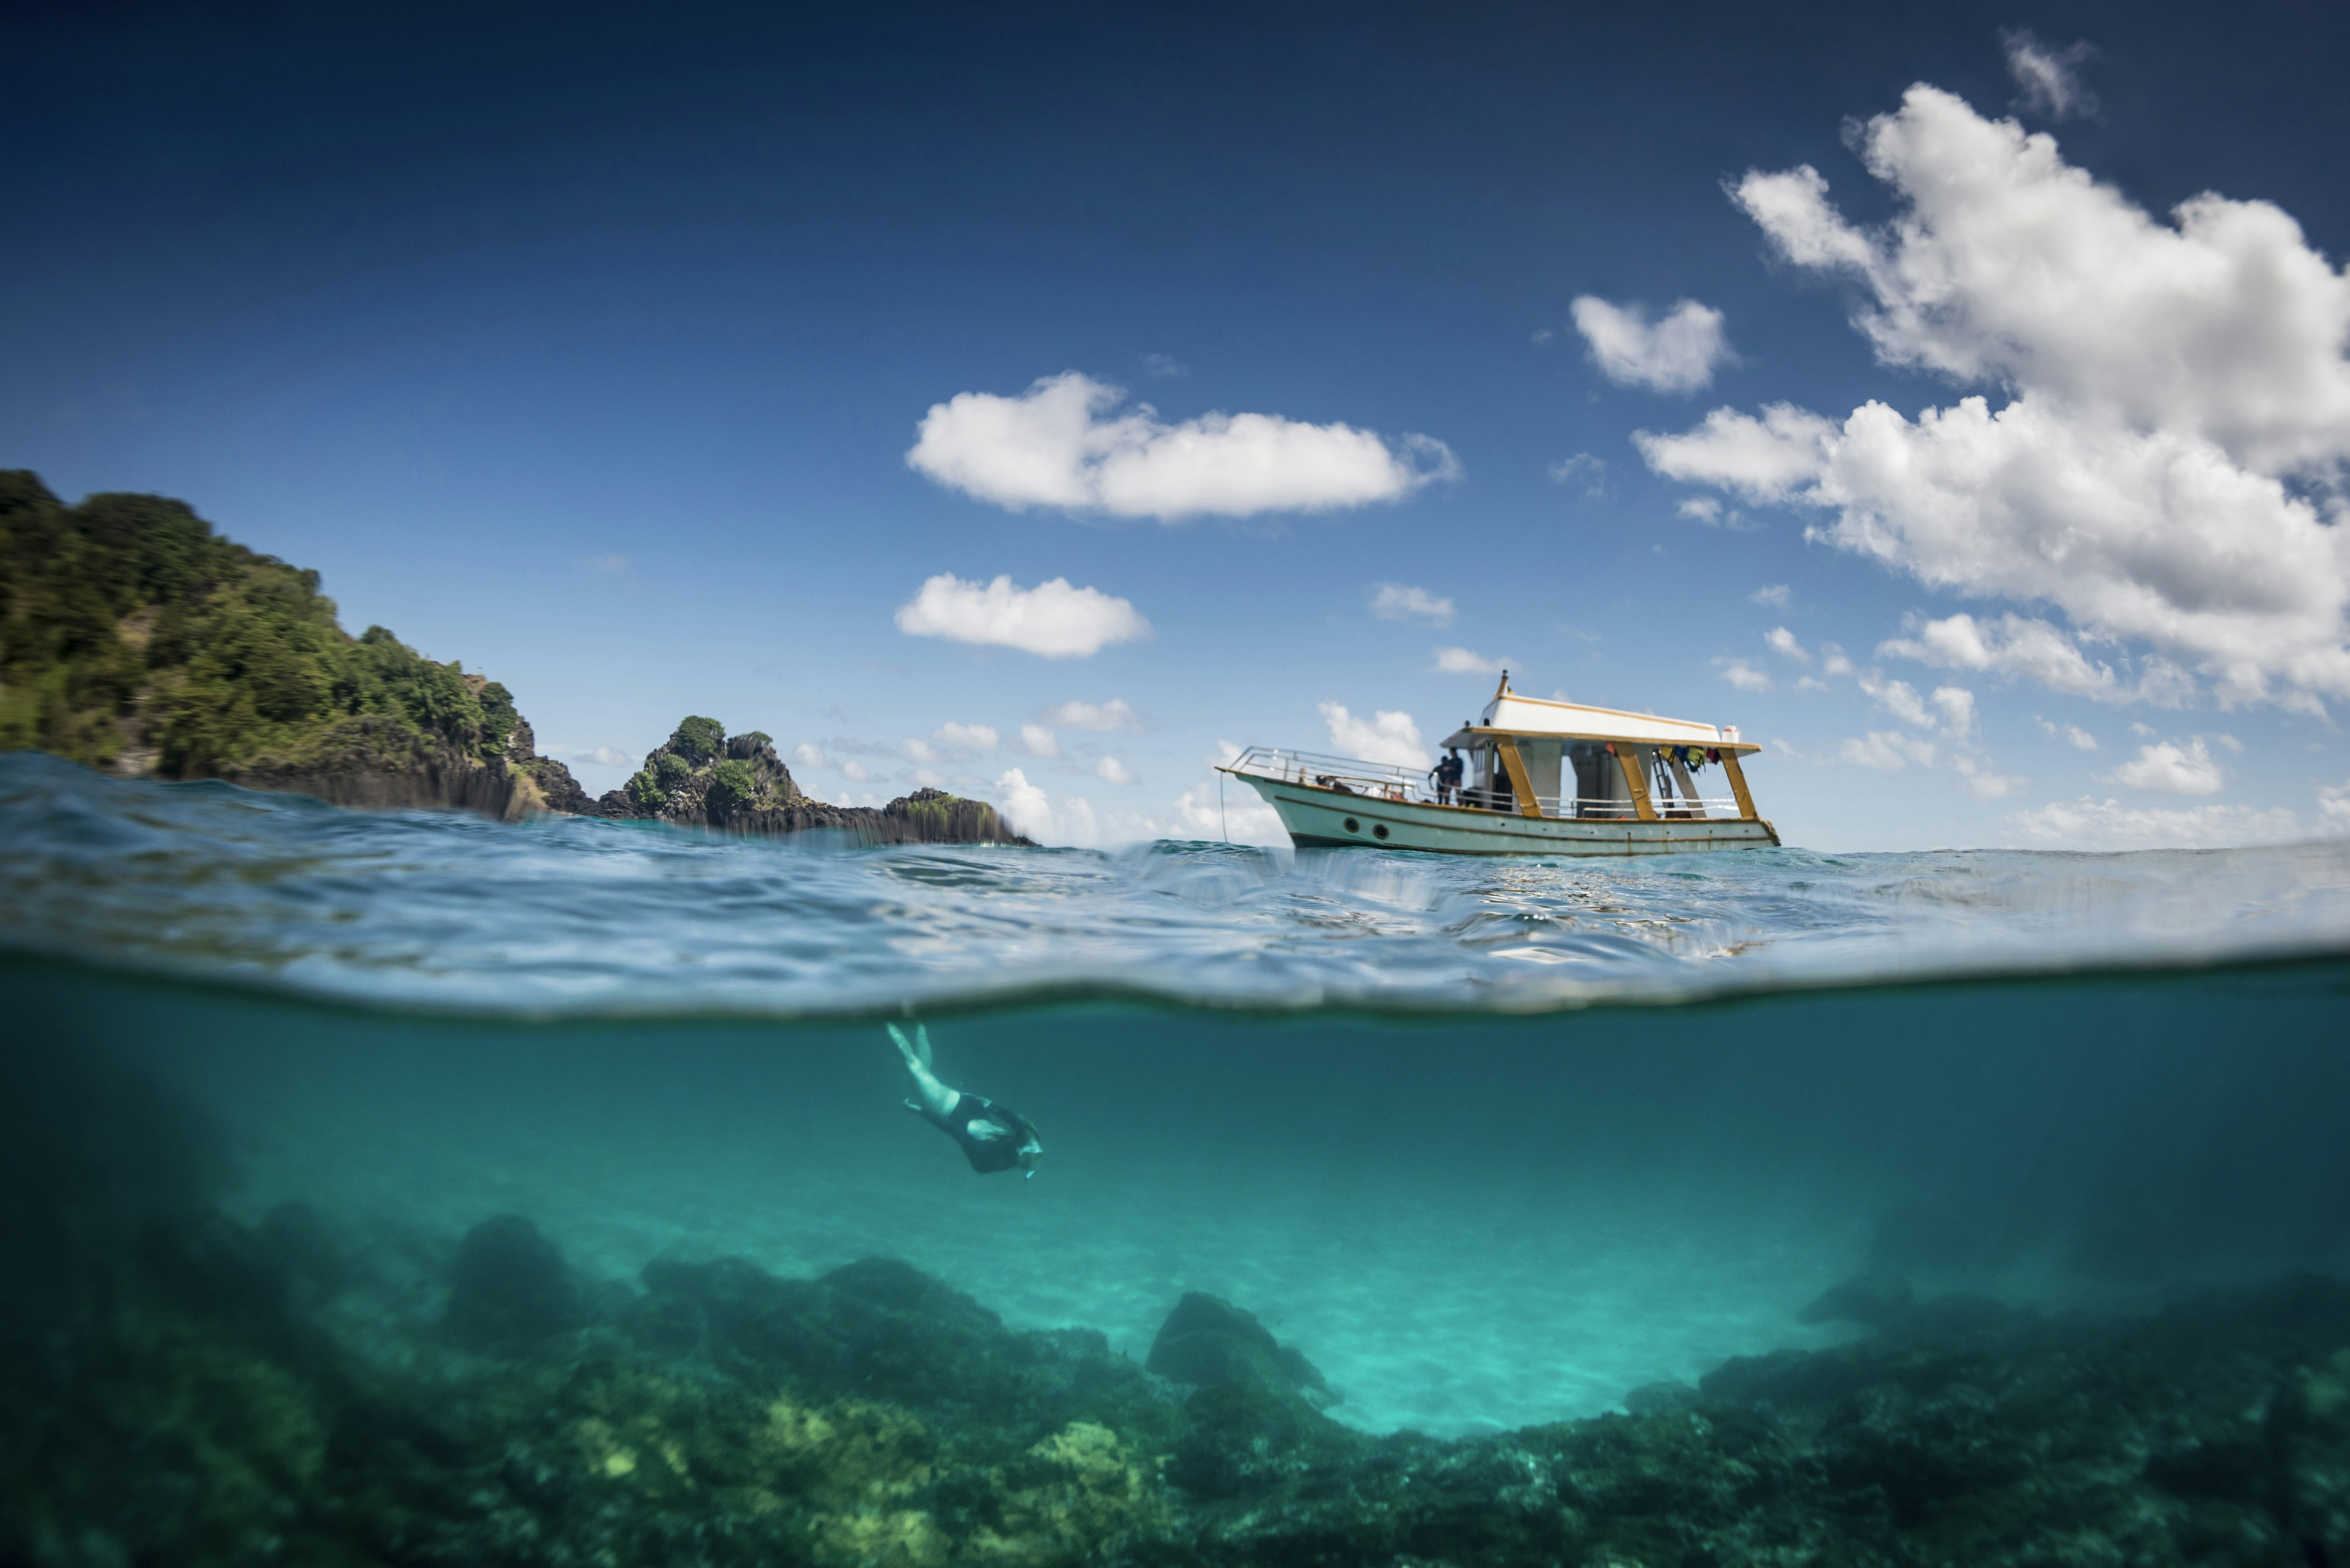 View of a tour boat and a woman free diving at 'Sancho' beach in the archipelago of Fernando de Noronha; the bottom half of the shot shows the diver under water, while the top half shows the boat floating by a rocky shore.